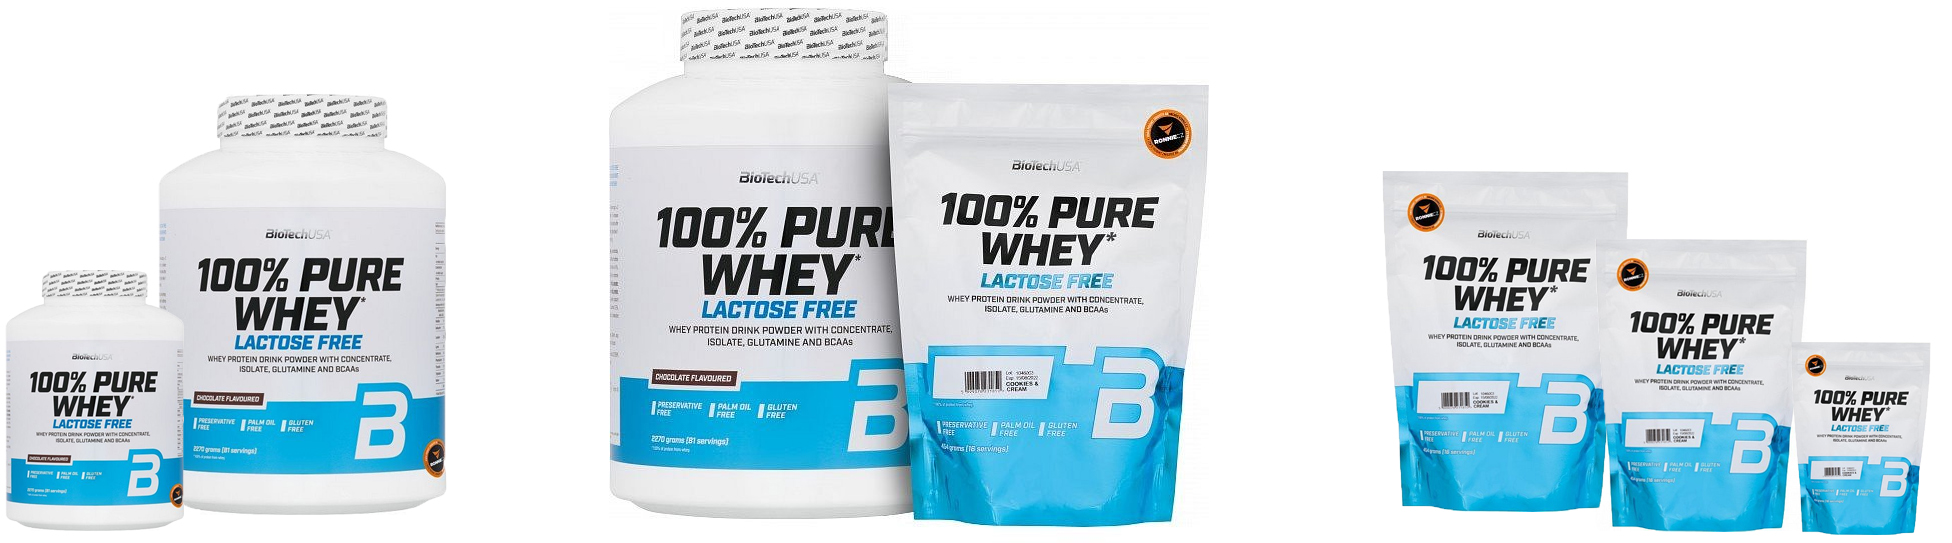 100 % Pure Whey Lactose Free